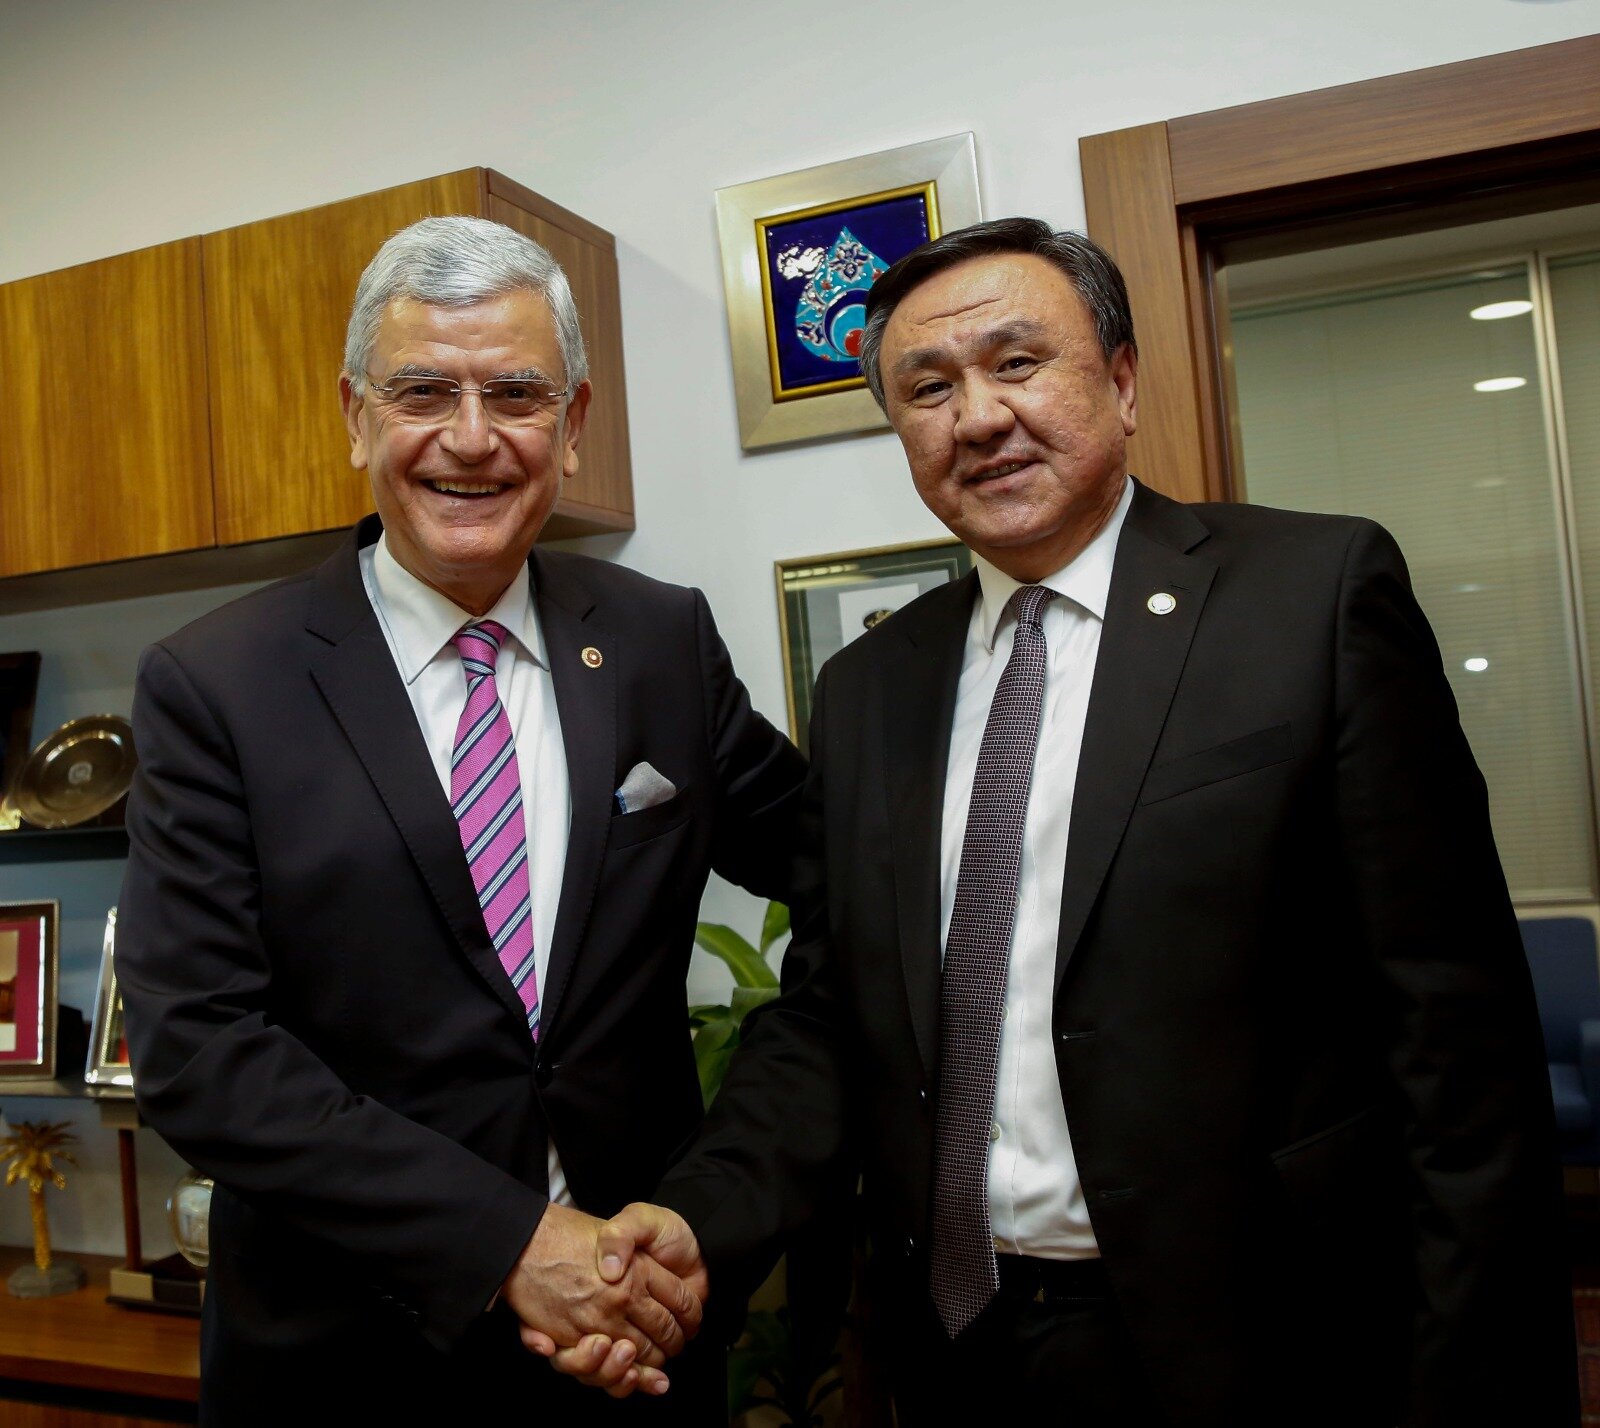 On May 28, 2019, there was the meetıng of the Ambassador Extraordinary and Plenipotentiary of the Kyrgyz Republic to the Republic of Turkey Kubanychbek Omuraliev with the Chairman of the Committee on International Affairs of the Grand National Assembly of Turkey Volkan Bozkyr